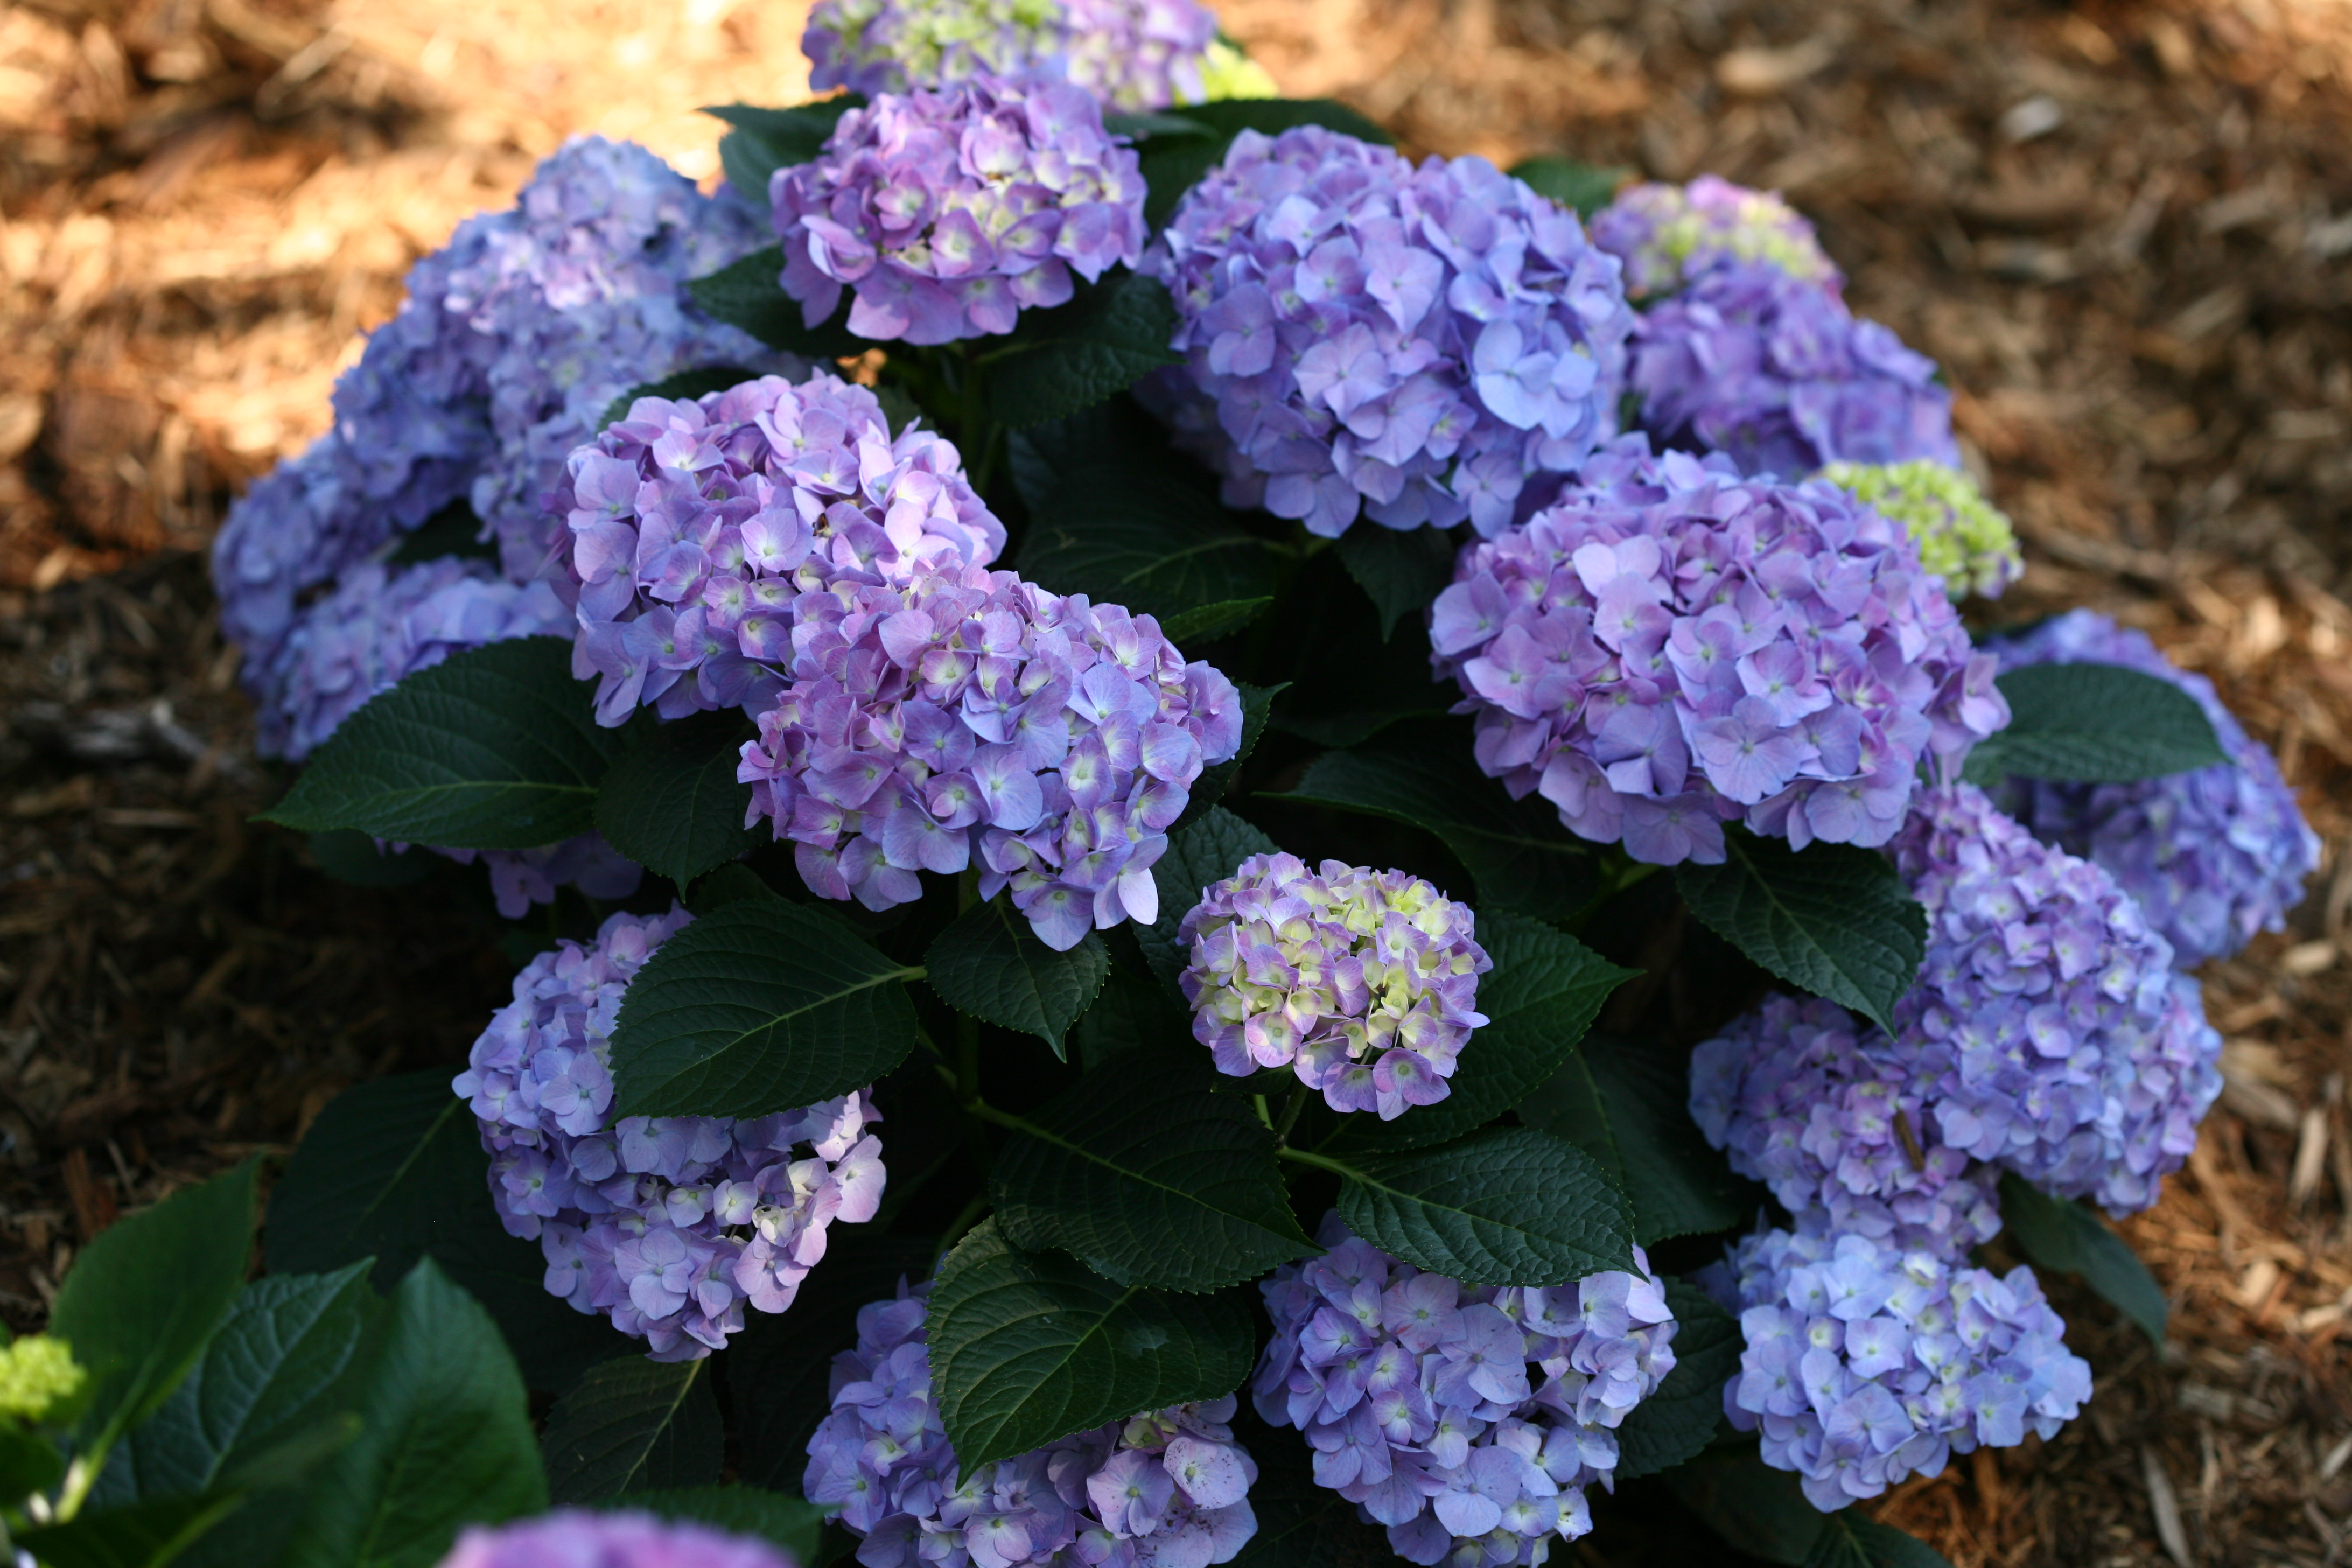 Image of Let's Dance Blue Jangles Hydrangea in a garden, with pink flowers